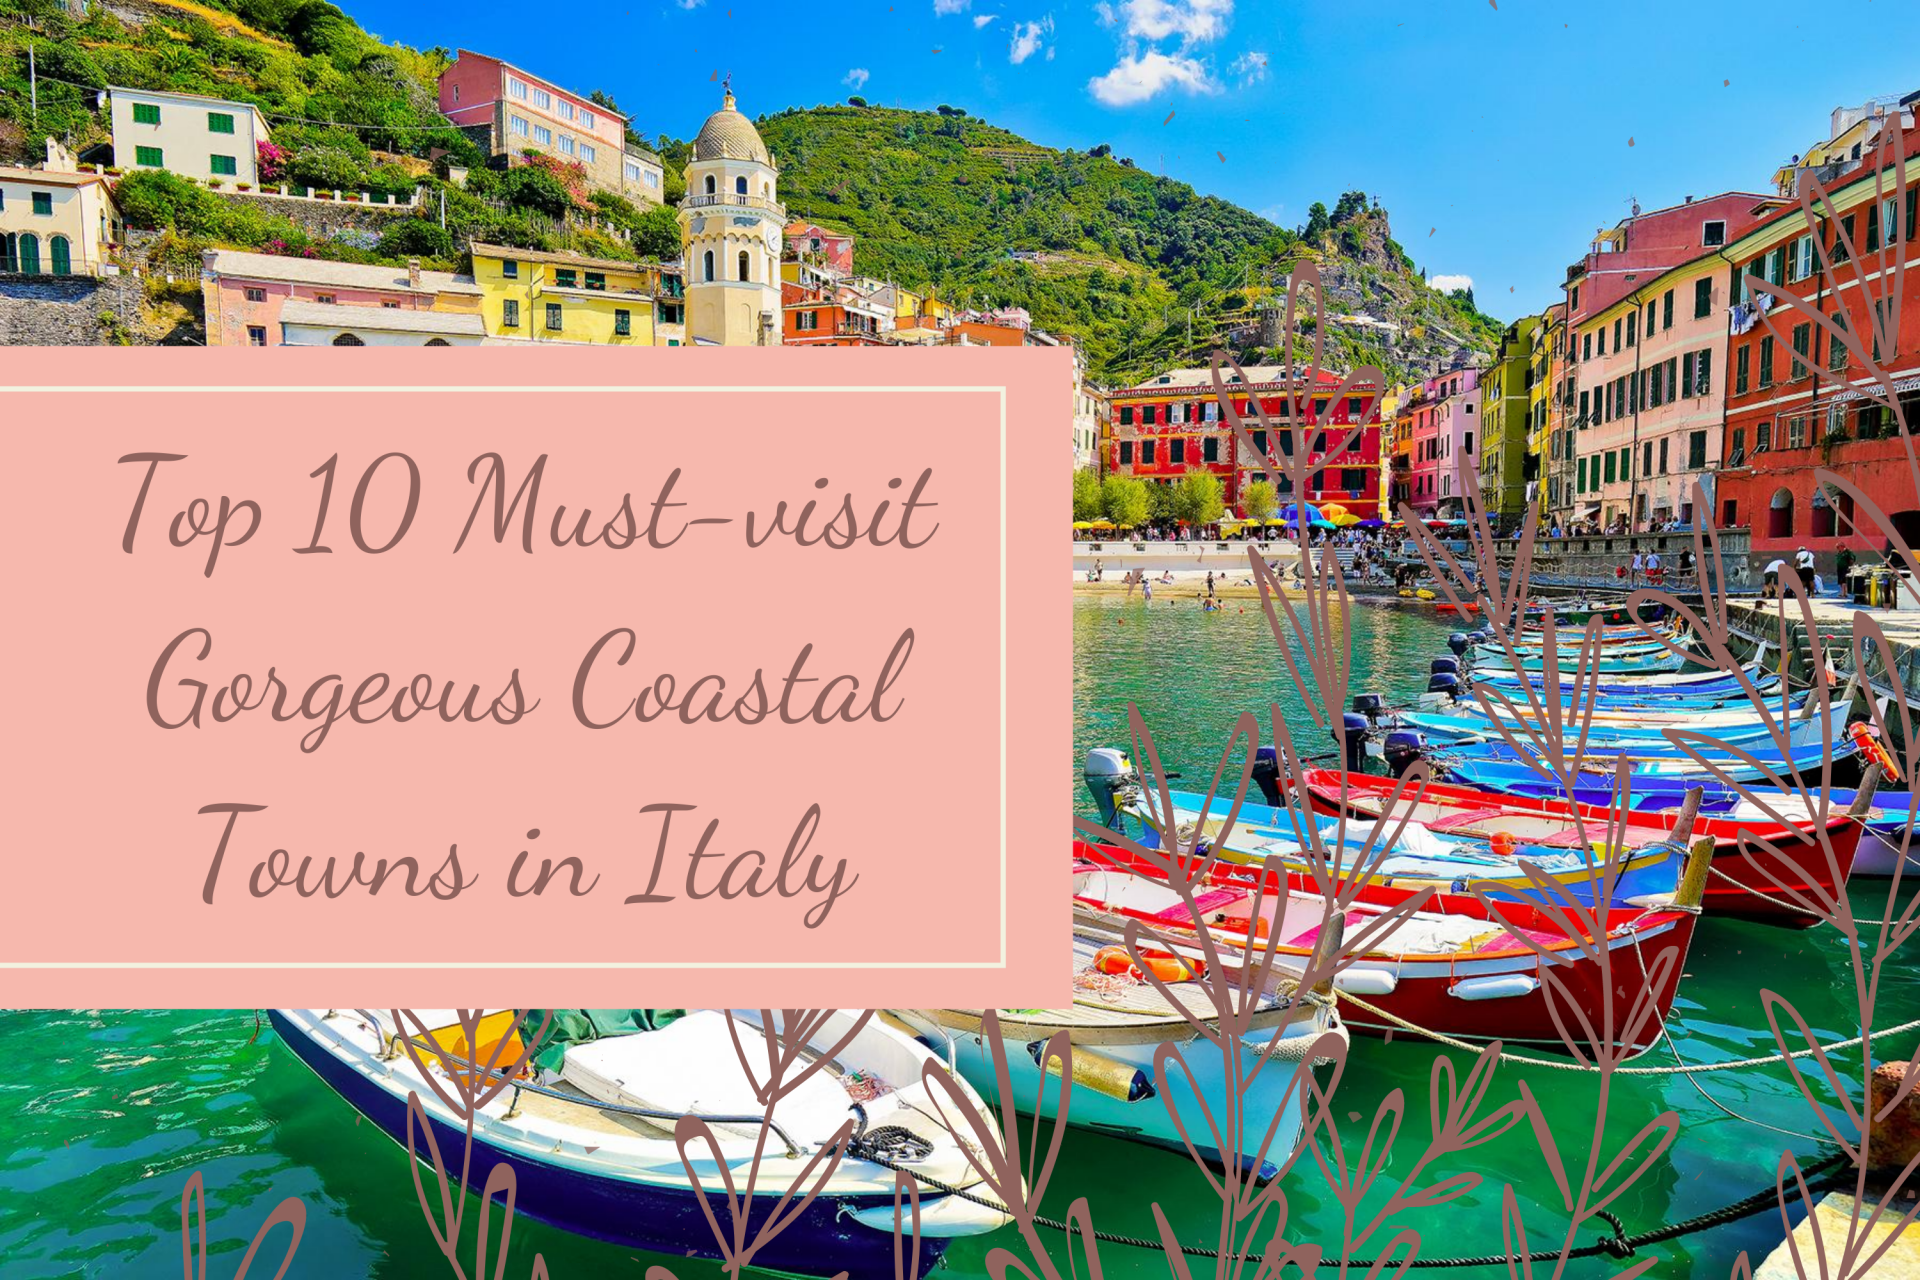 Top 10 Must-visit Gorgeous Coastal Towns in Italy